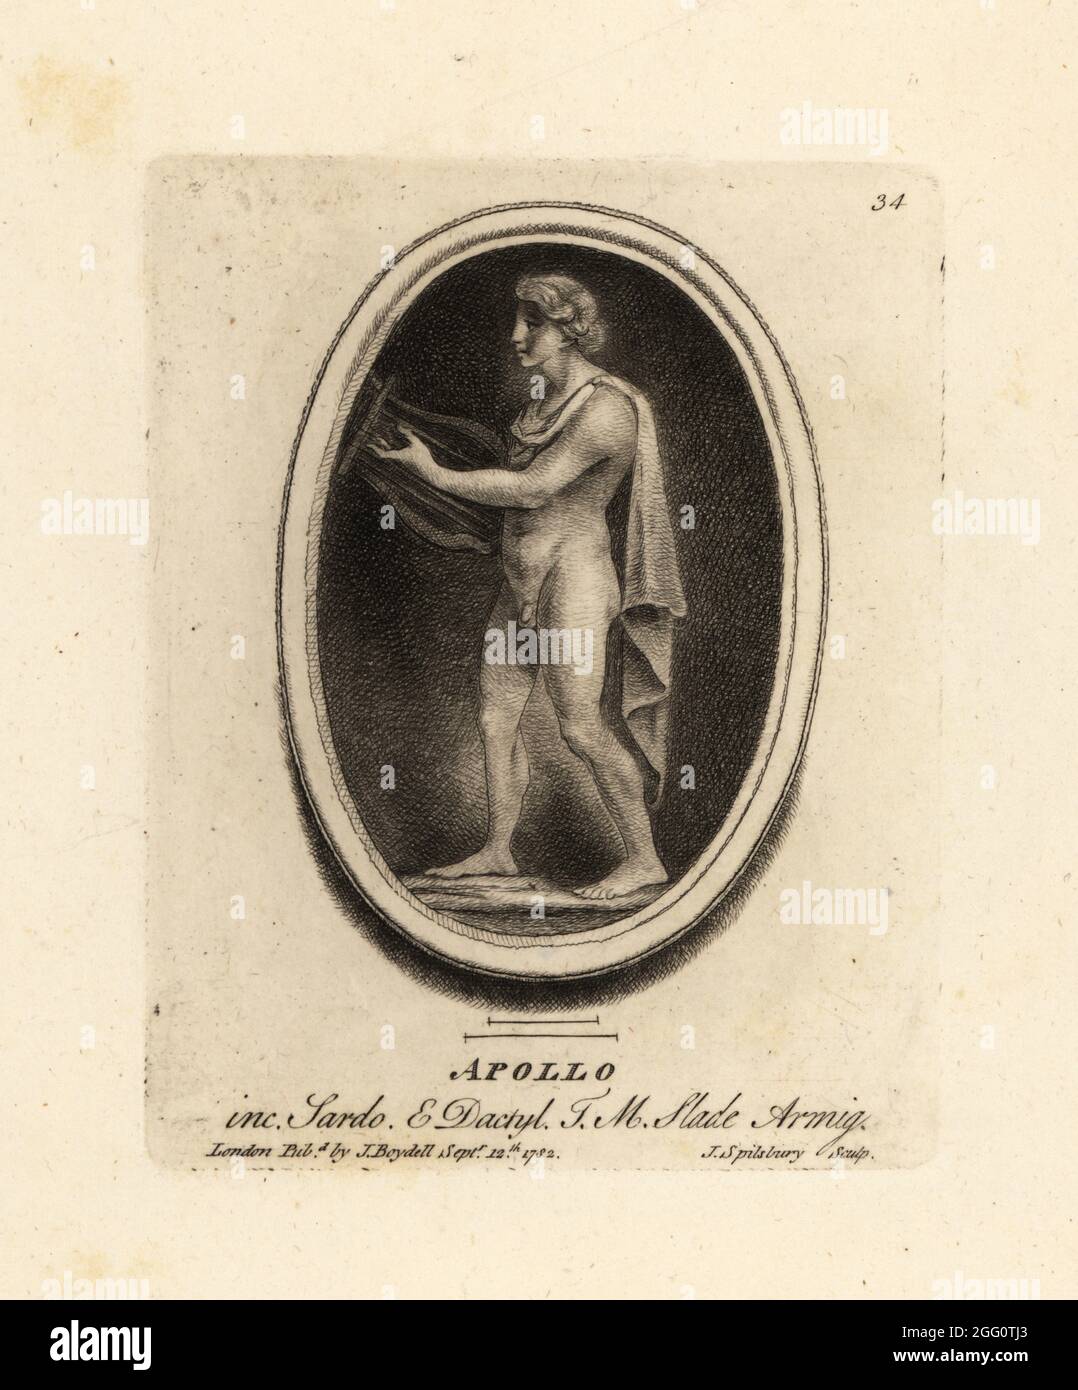 Figure of Apollo, Greek and Roman god of archery, music, dance, truth and poetry. Holding a lyre. Engraved on sardonyx and dactylotheca from the collection of the art dealer Thomas Moore Slade. Mezzotint copperplate engraving by John Spilsbury from his Collection of Fifty Prints from Antique Gems, John Boydell, London, 1785. Stock Photo